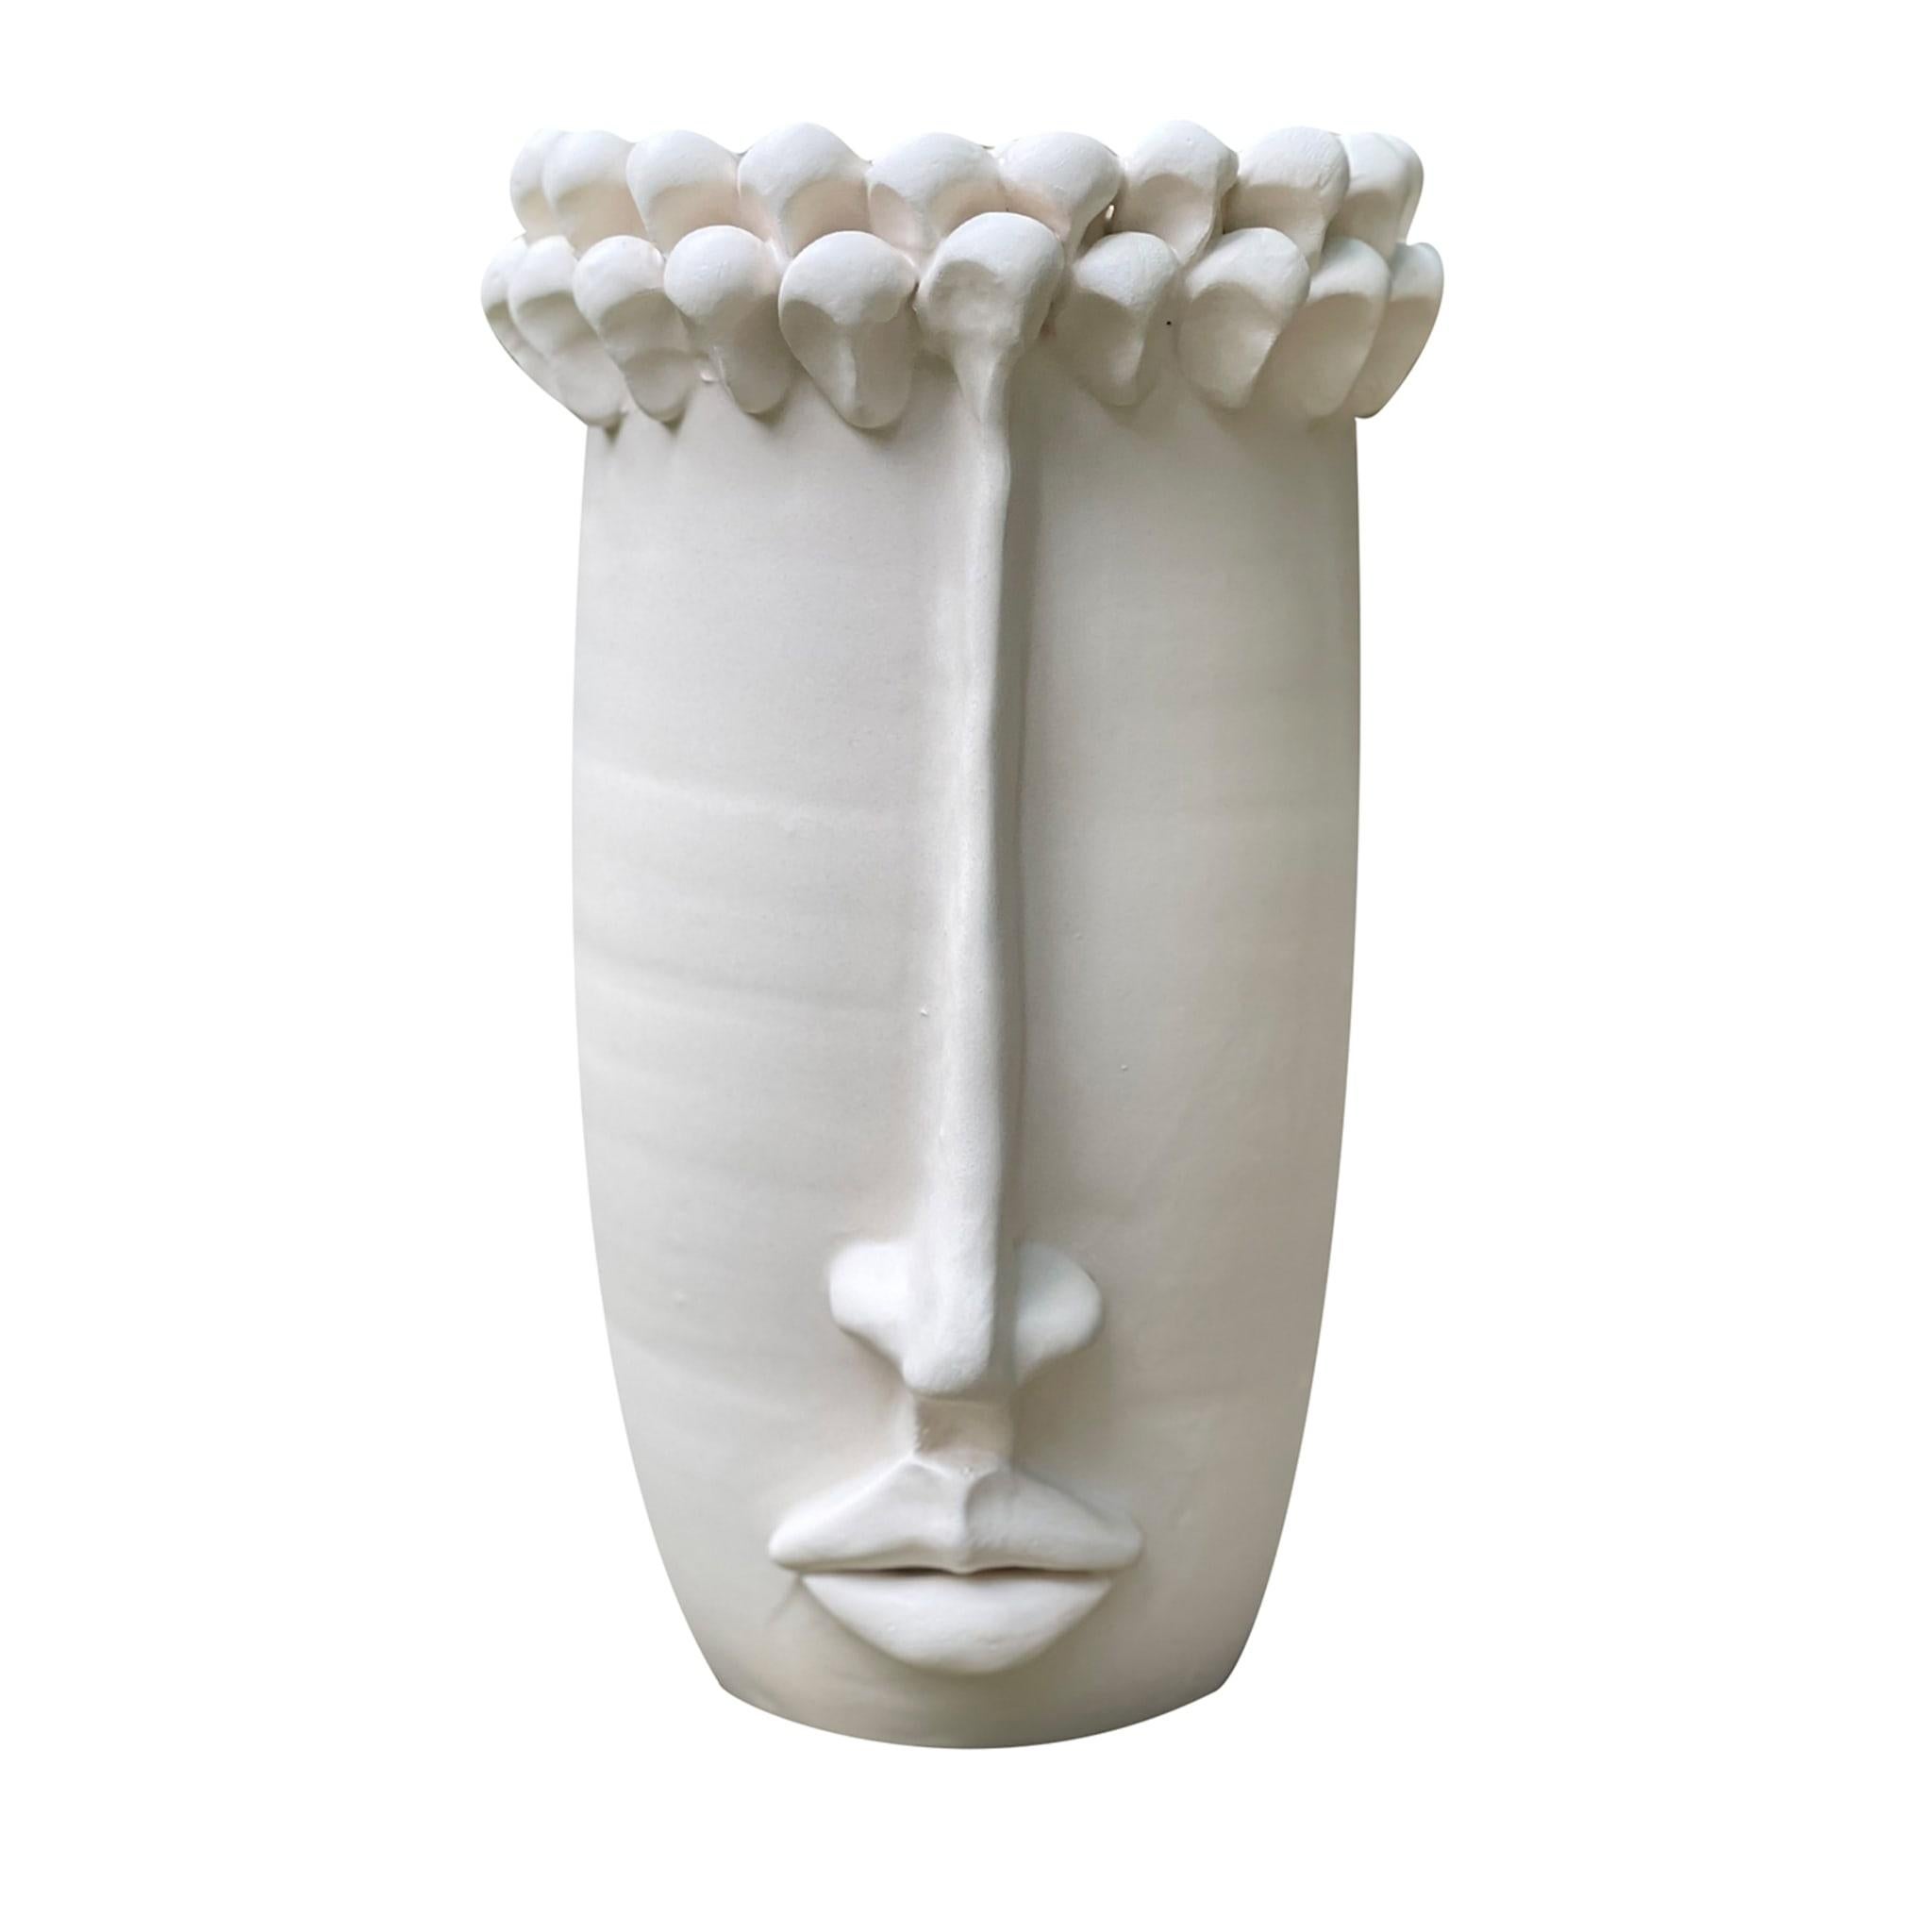 A decorative vase for the home, that can contain water and flowers. The pinecones above the head are an element that characterizes the Sicilian culture: a symbol of hospitality and good wishes.